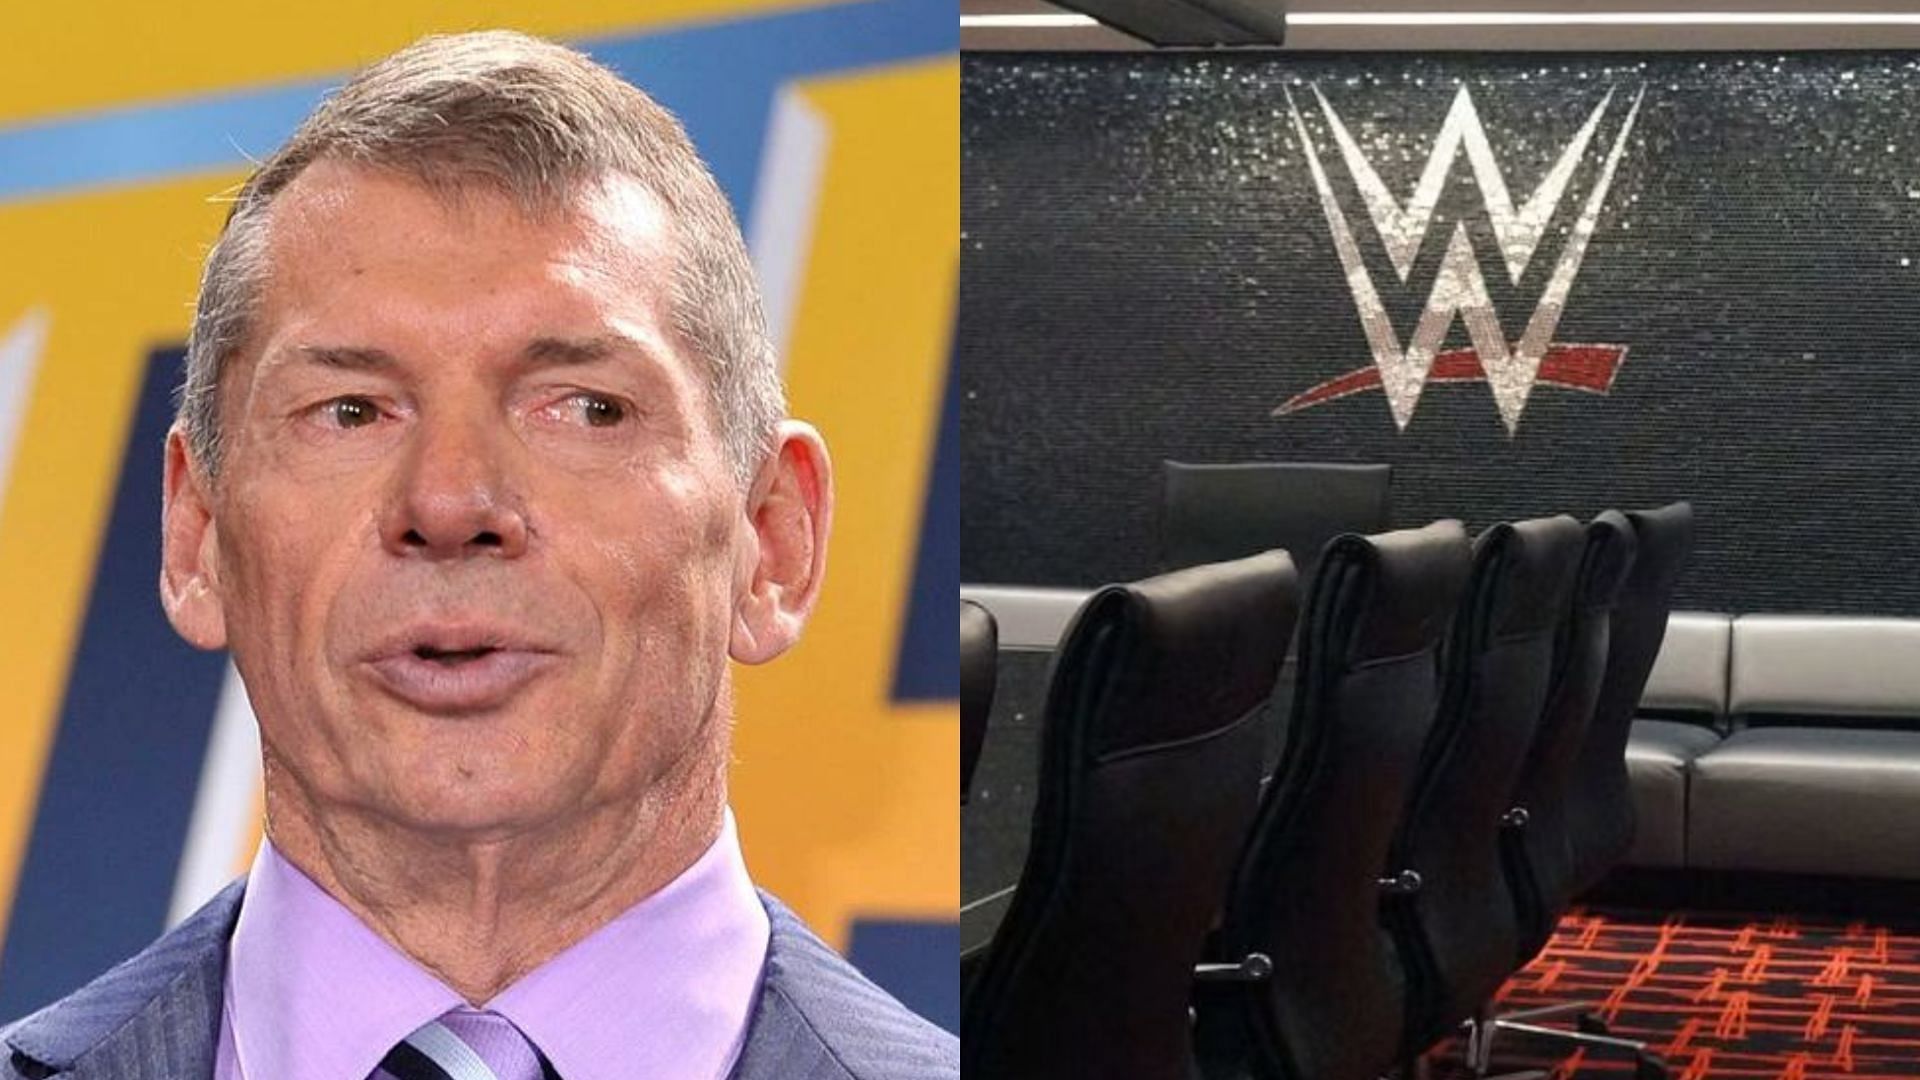 Vince McMahon was under investigation by the Board of Directors last year.